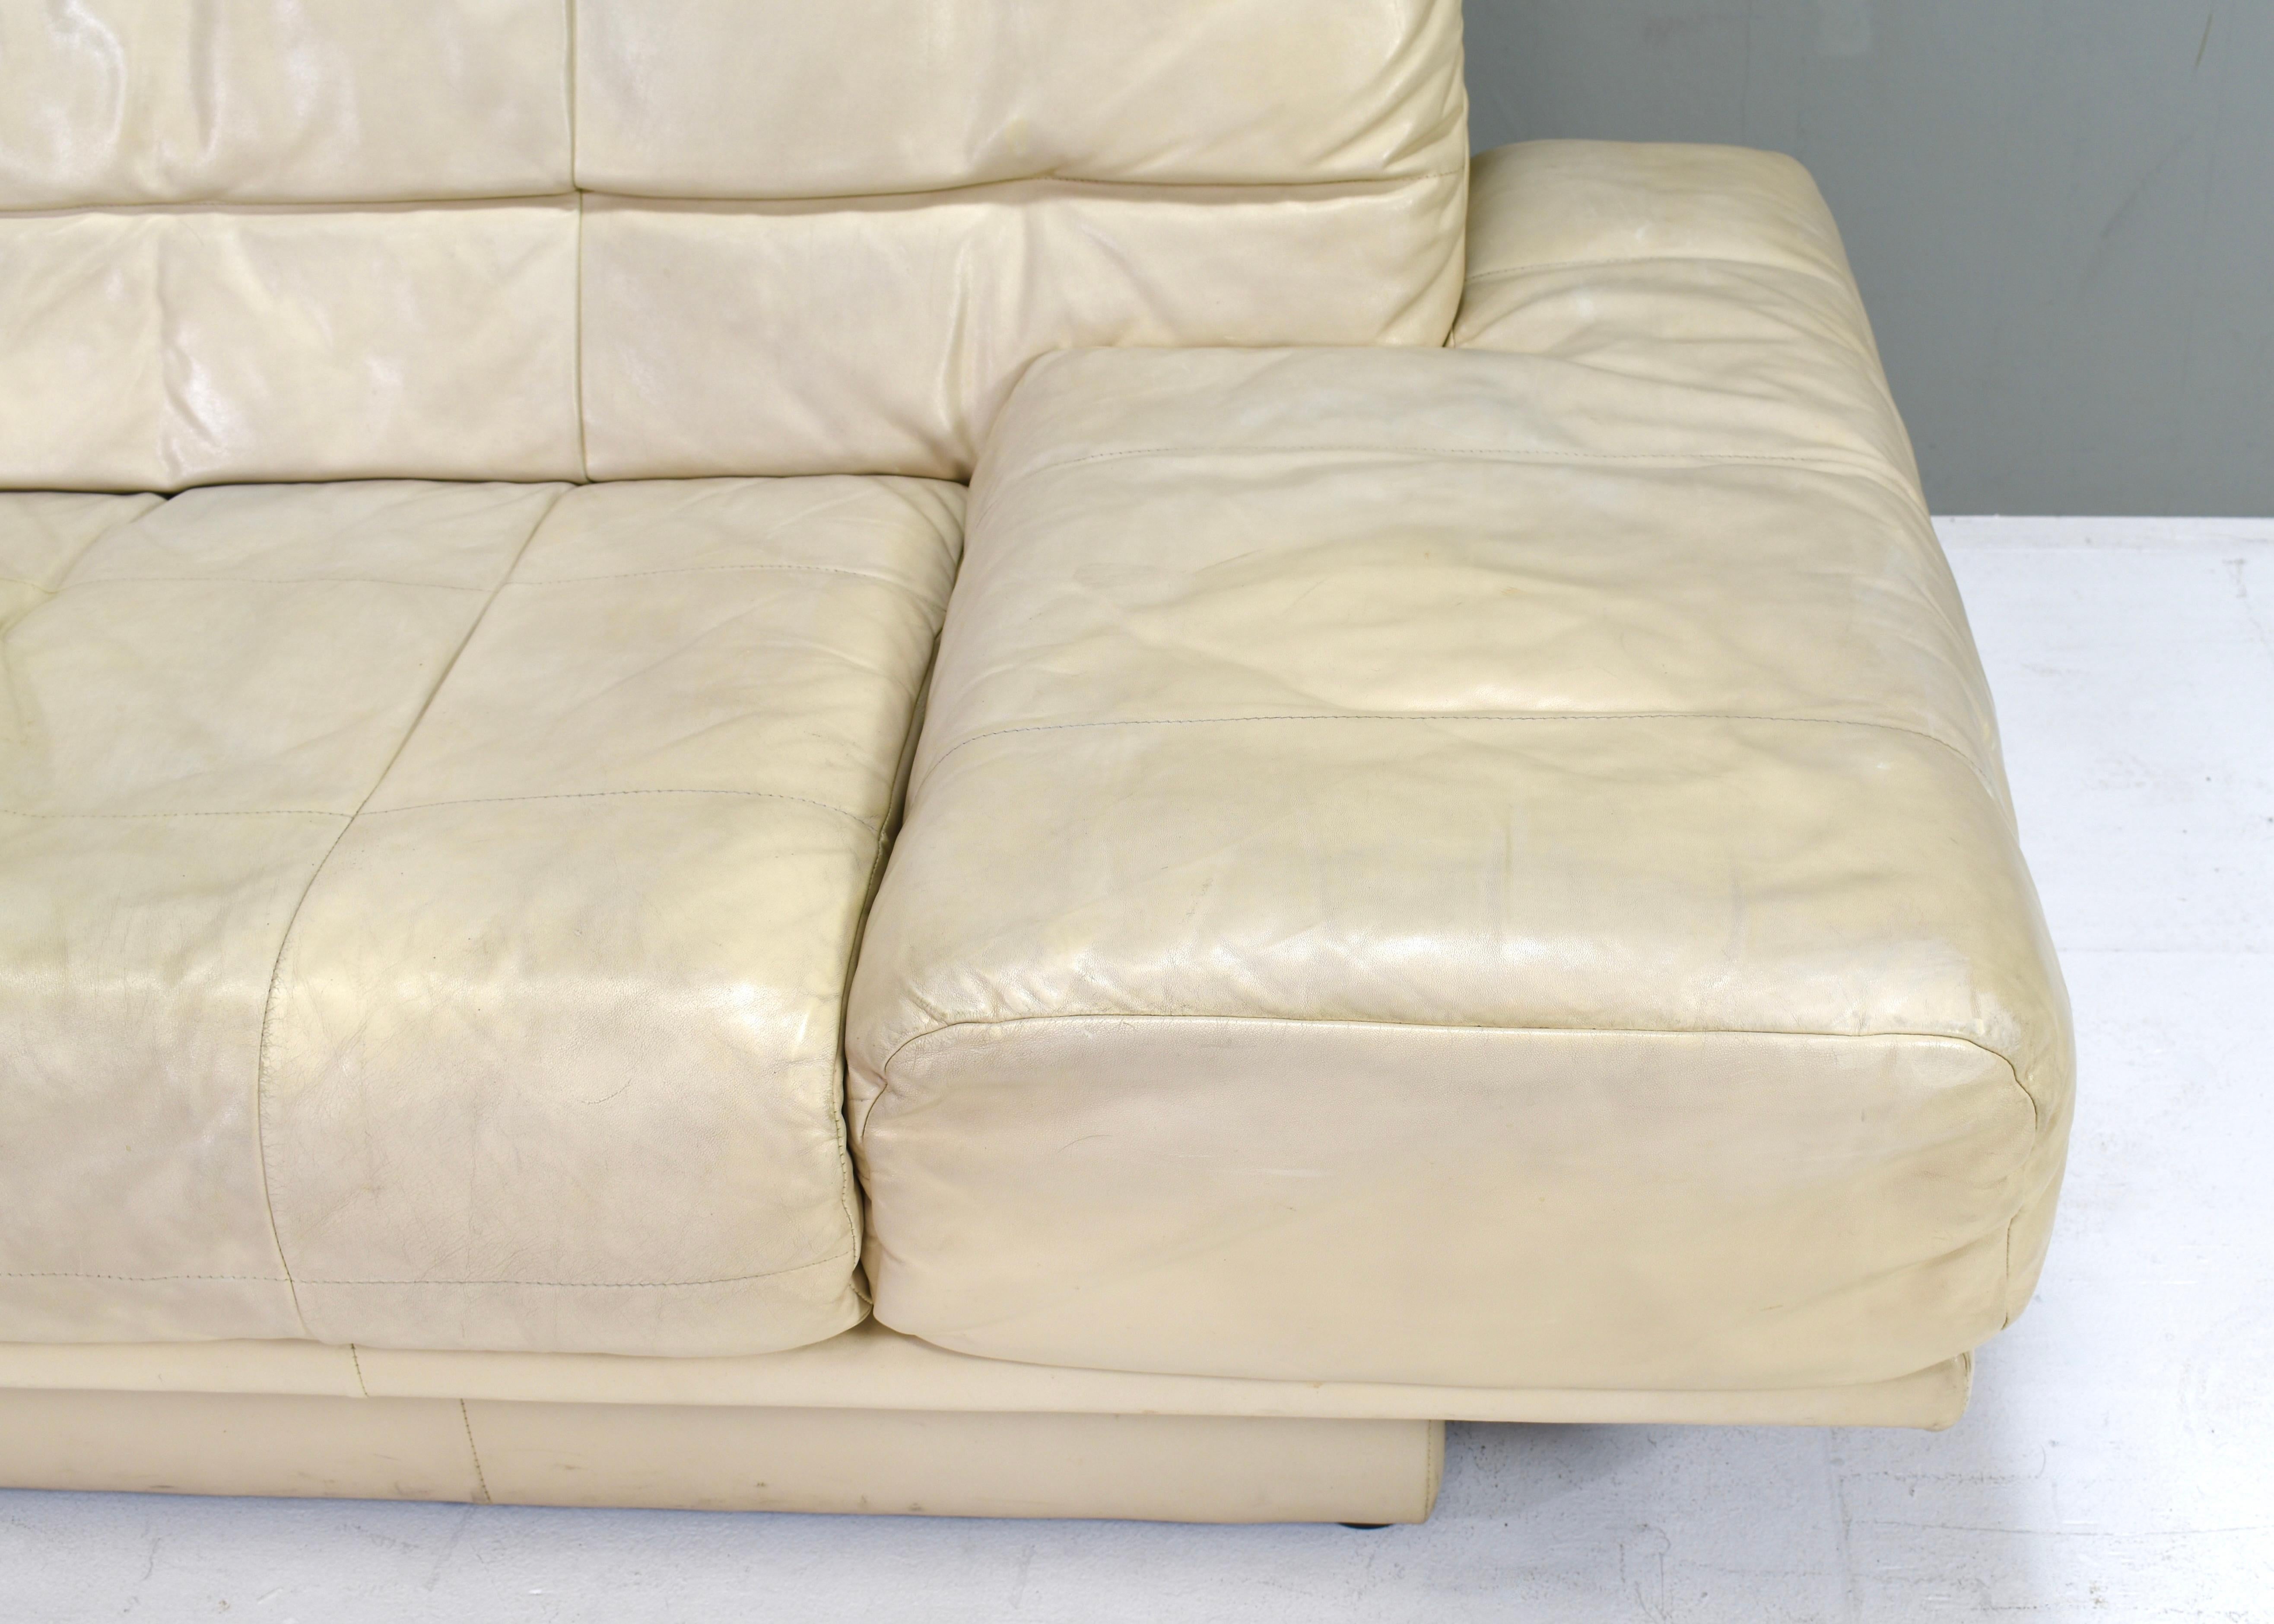 Pair of Rolf Benz sofa’s 2-seat and 3-seat – Germany, circa 1980-1990 For Sale 13